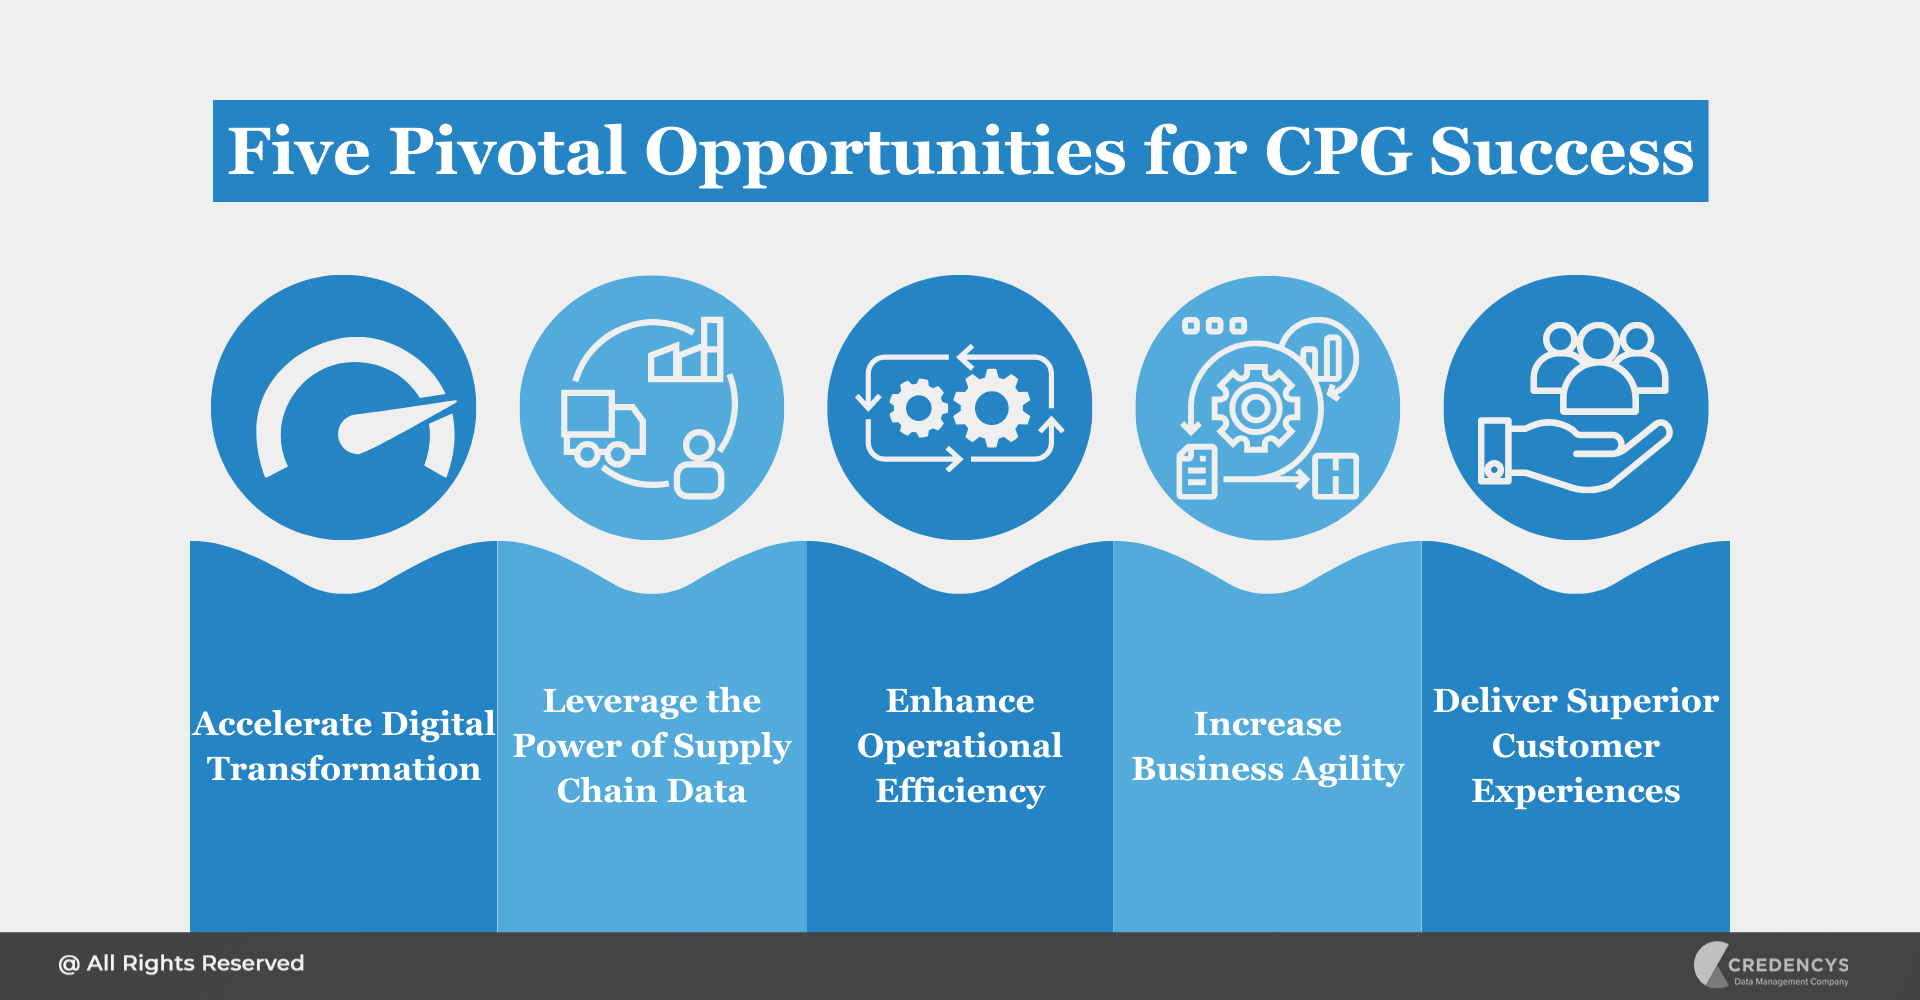 Five Pivotal Opportunities for CPG Success